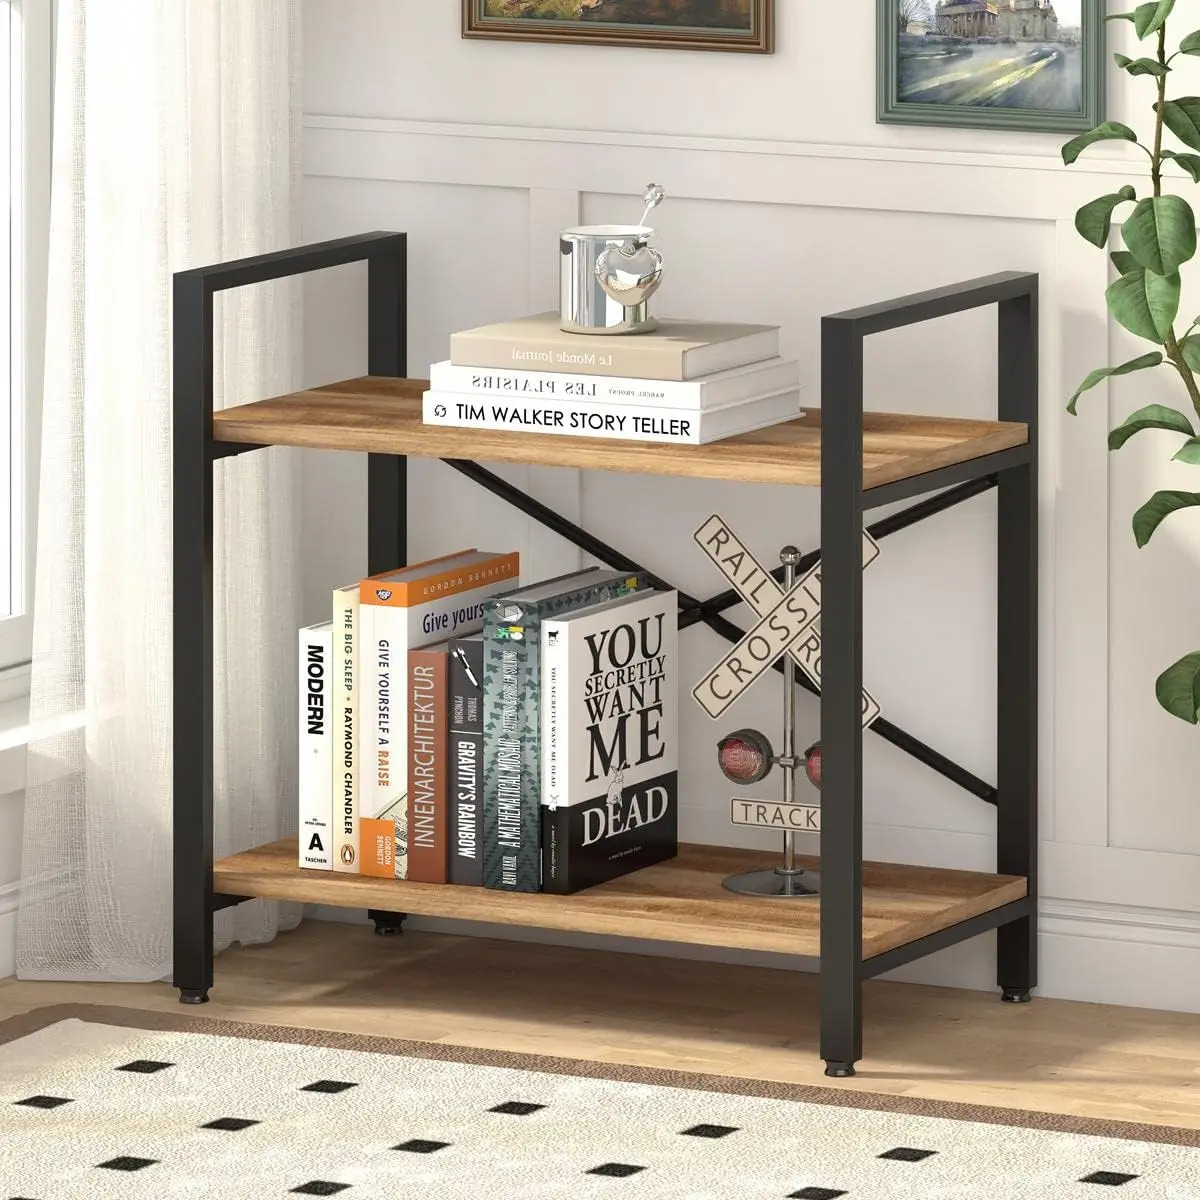 bon-augure-small-bookshelf-for-small-space-industrial-2-tier-wood-metal-bookcase-rustic-short-book-shelf-for-living-room